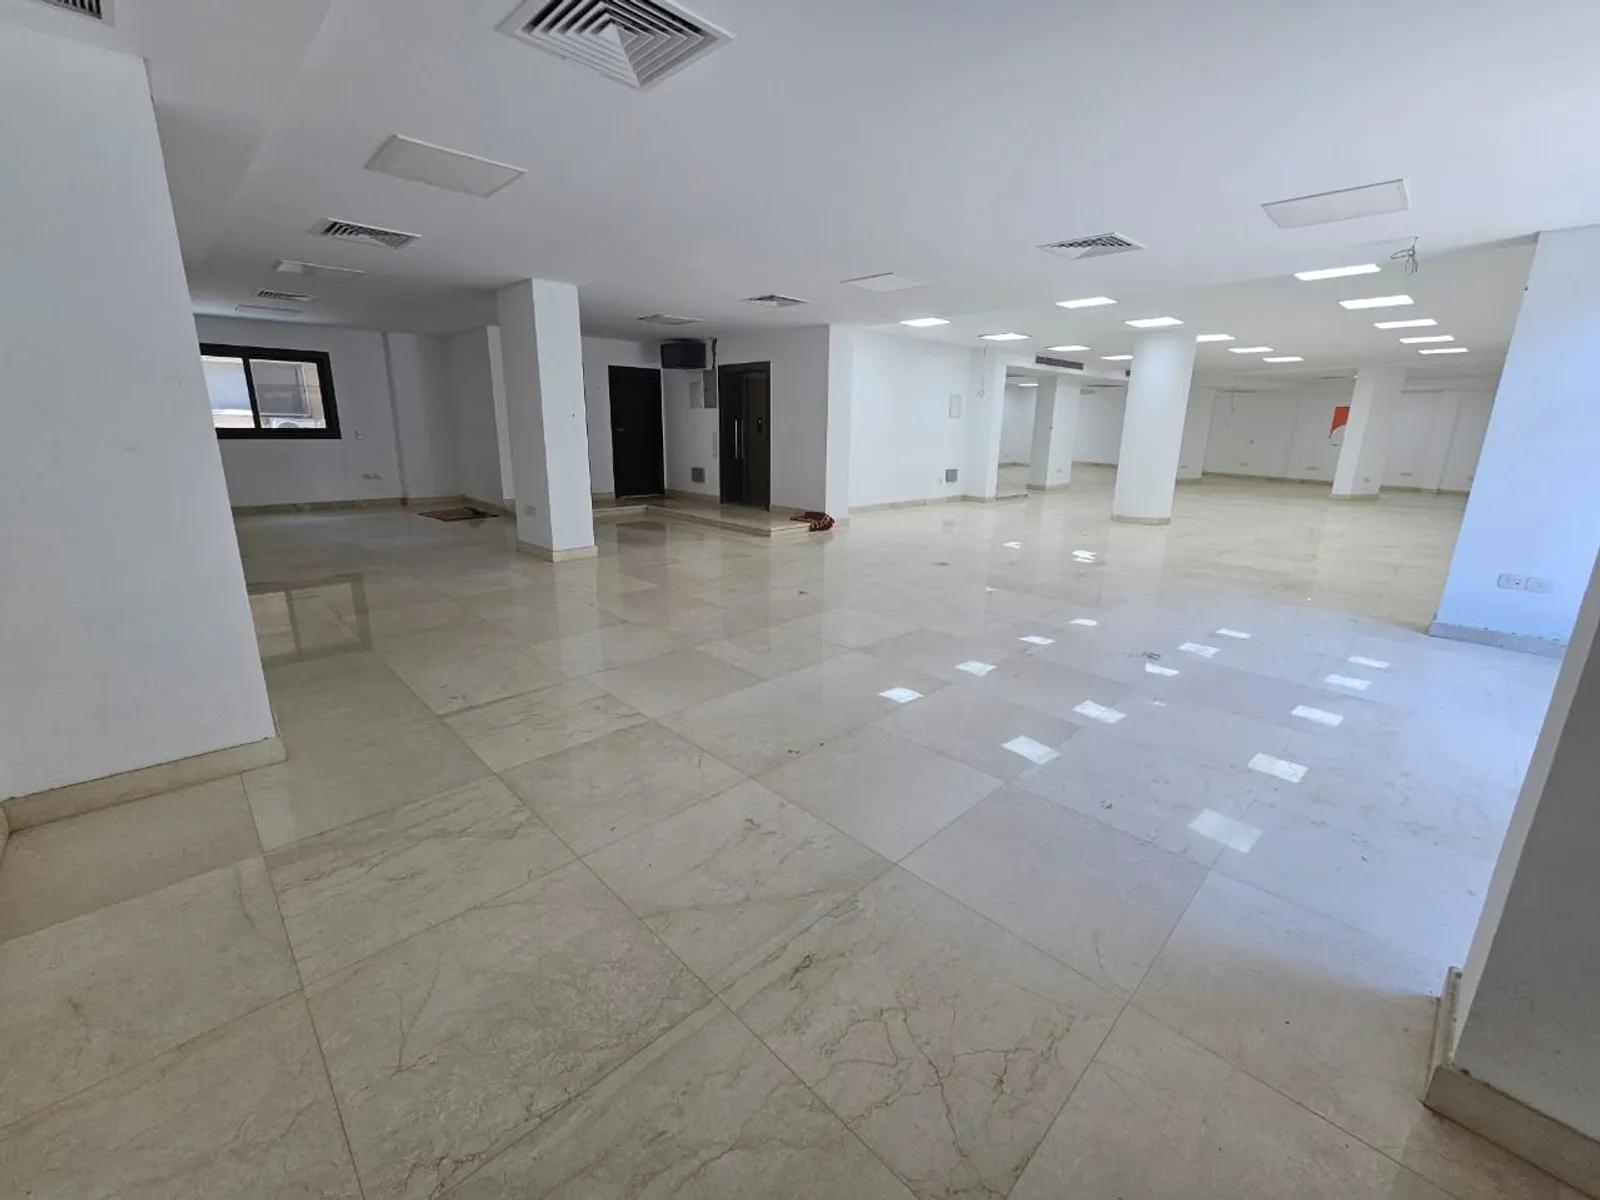 Office spaces For Sale In Maadi Maadi Degla Area: 450 m² consists of 0 Bedrooms 2 Bathrooms Semi furnished 5 stars #5864